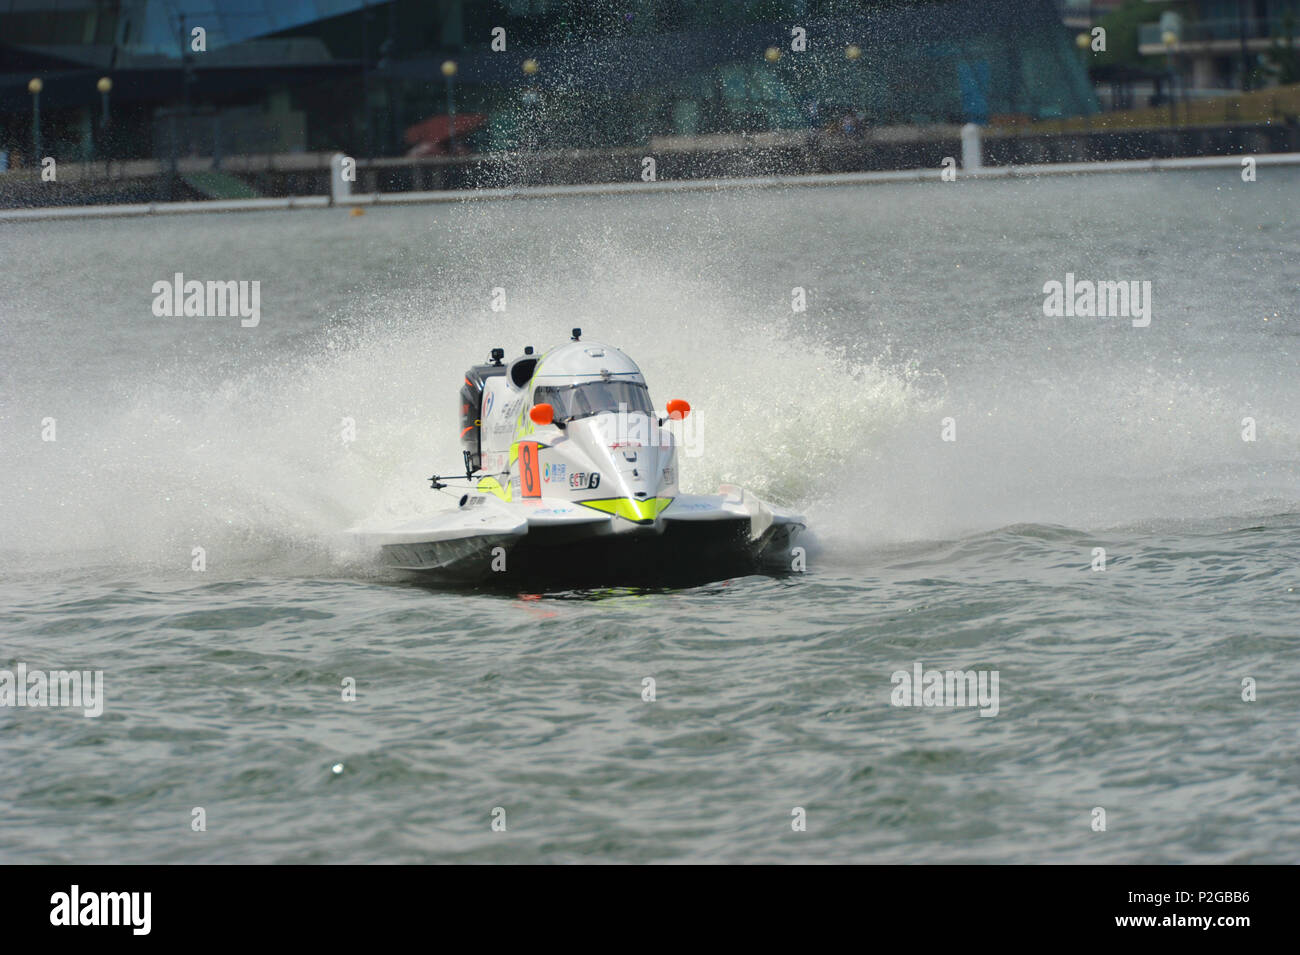 London, UK. 15th Jun, 2018. Peter Morin (FRA, CTIC F1 Shenzhen China) racing in a Formula 1 powerboat free practice session during the UIM F1H2O World Championship, Royal Victoria Dock.  The UIM F1H2O World Championship is a series of international powerboat racing events, featuring enclosed cockpit, catamarans which race around an inshore circuit of around 2km at speeds of up to 136mph/220kmh. Credit: Michael Preston/Alamy Live News Stock Photo